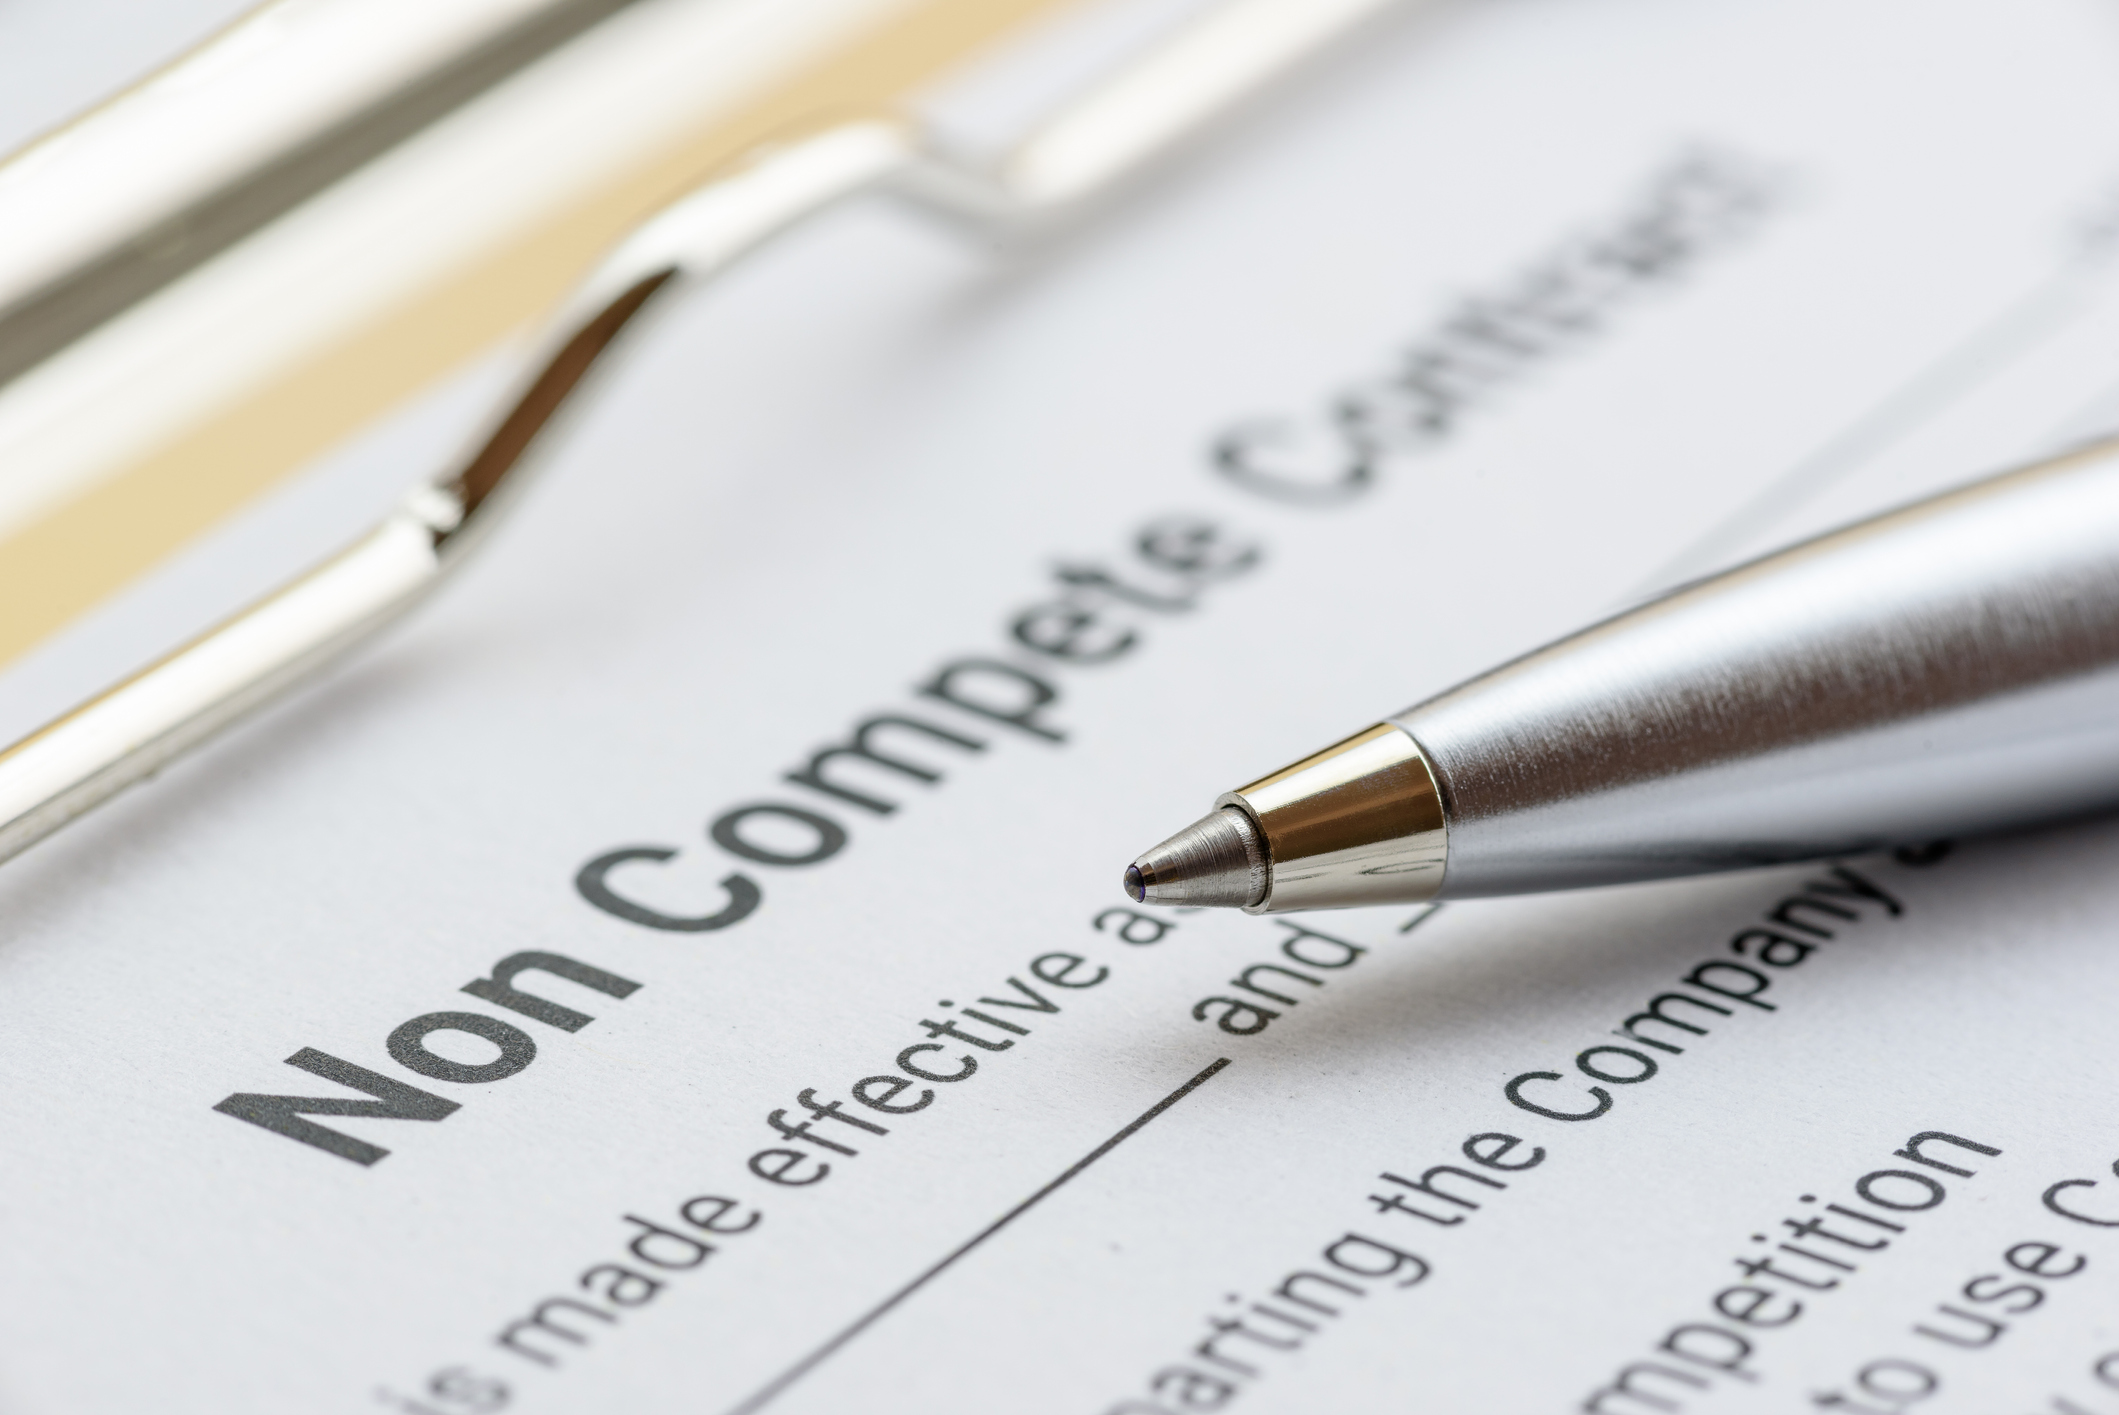 Public Comment Sought on Proposed Federal Ban of Non-Compete Agreements